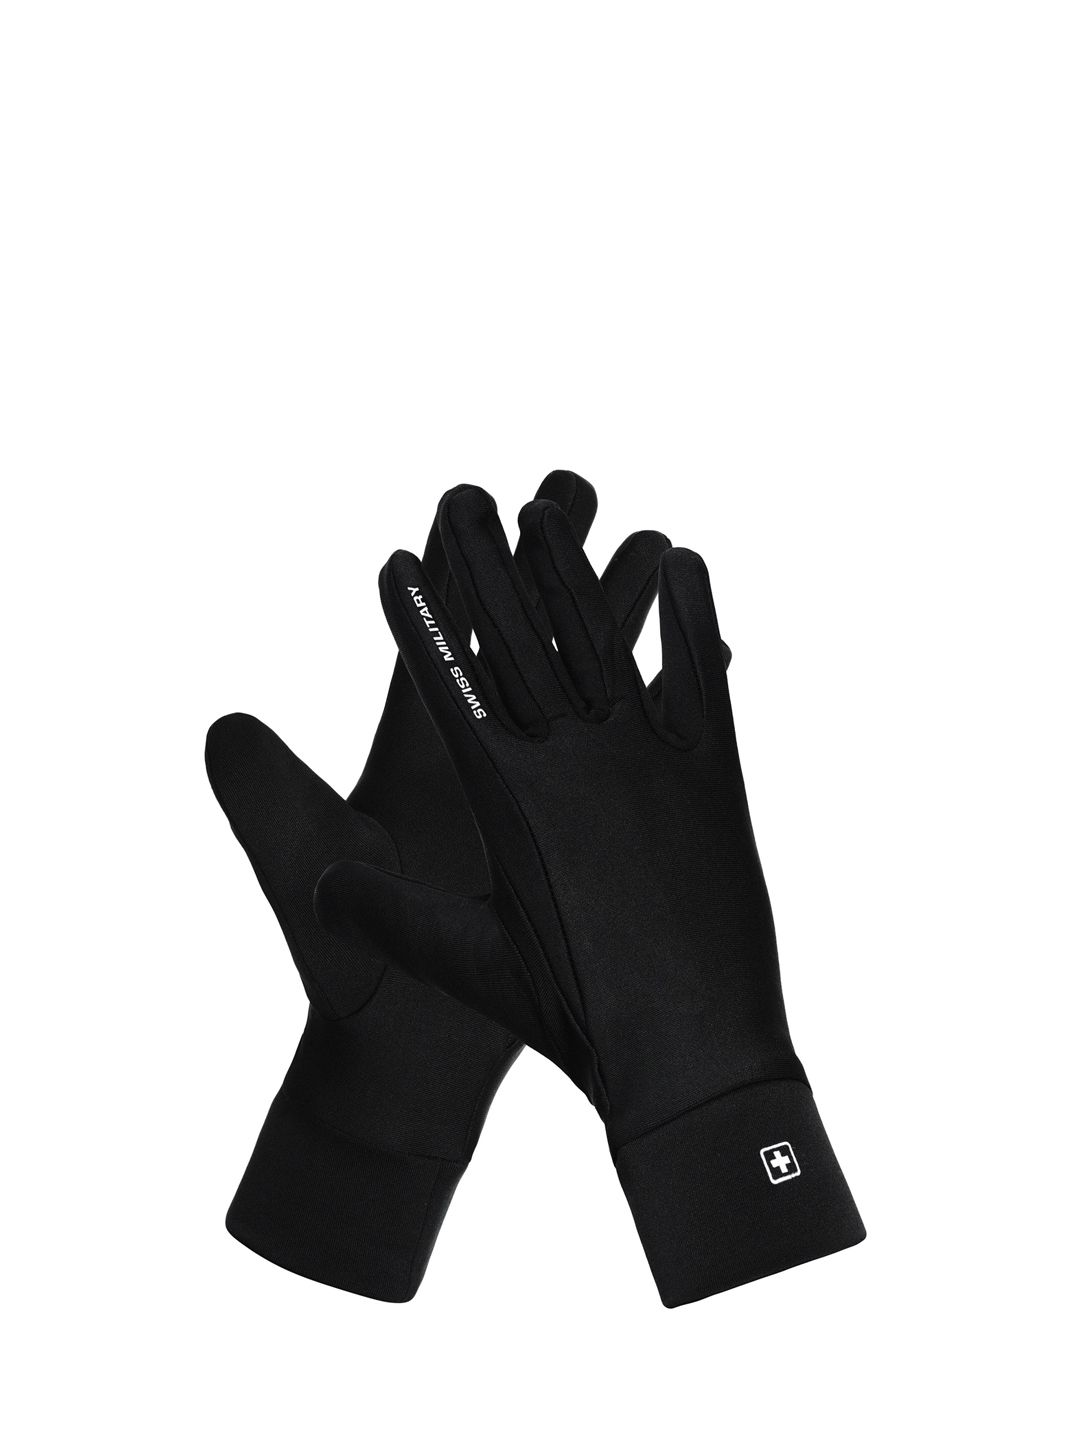 SWISS MILITARY Unisex Black Solid Reusable Anti-Bacterial Gloves Price in India